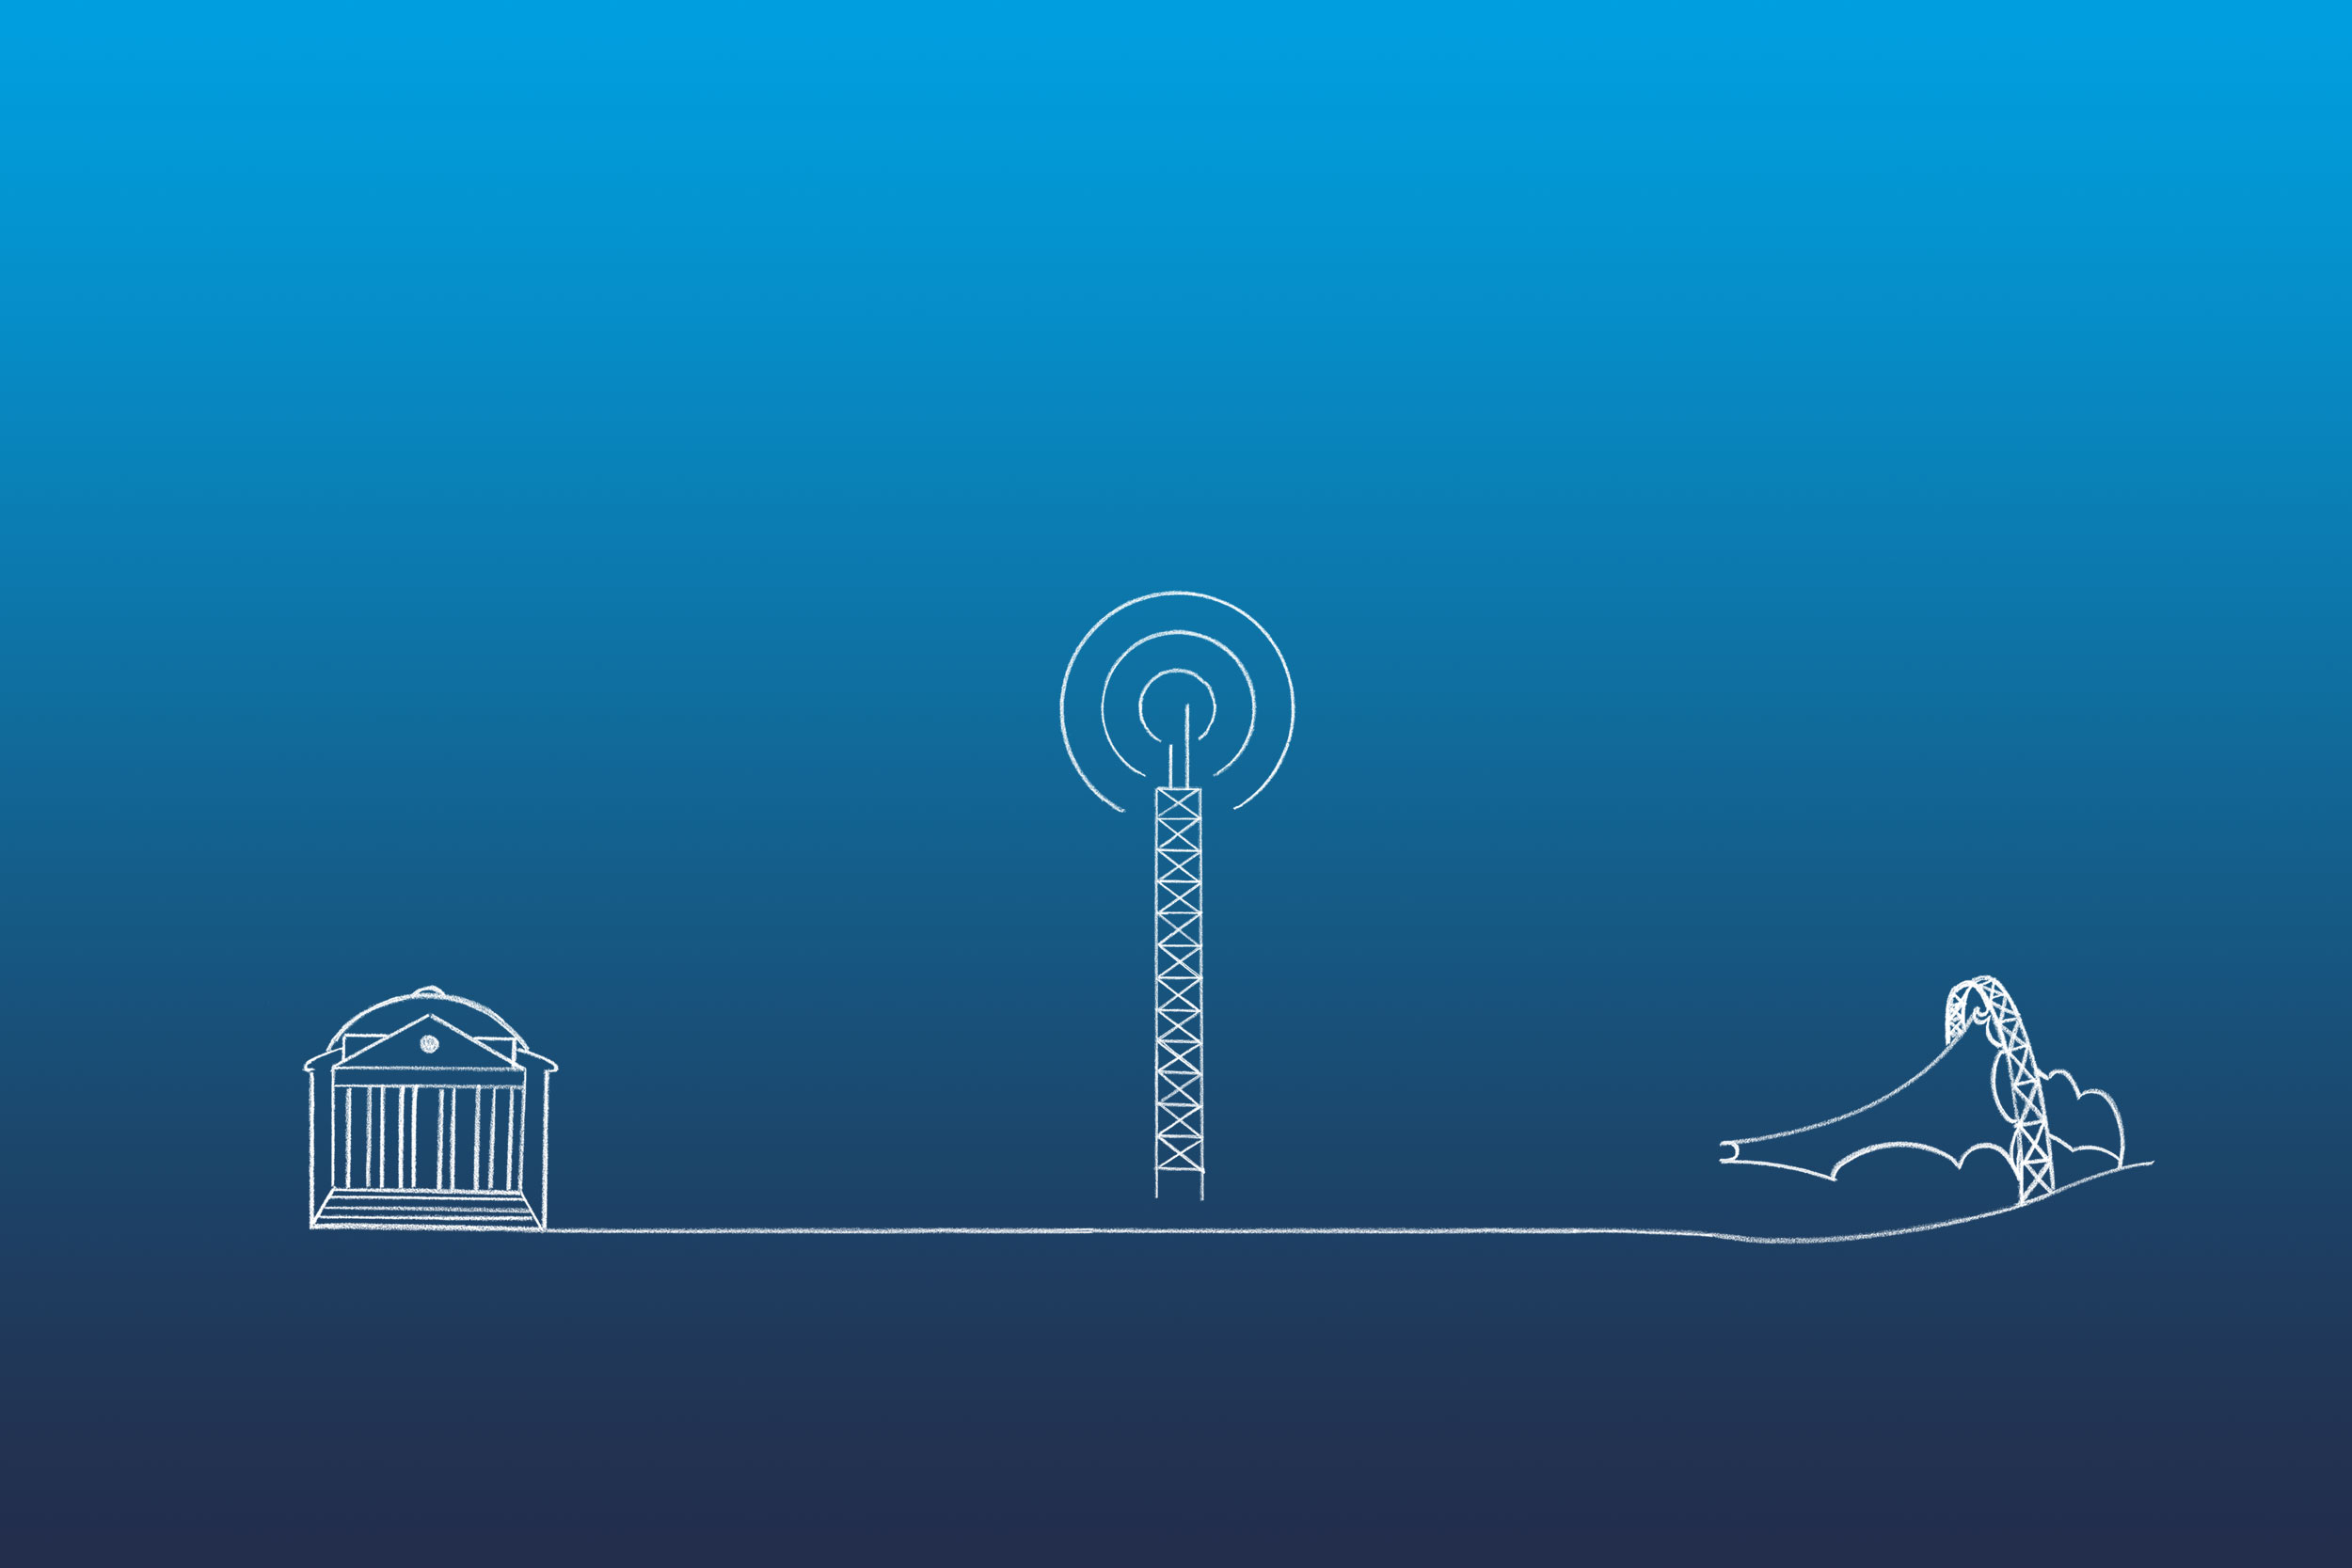 Illustration of the Rotunda, a cellphone tower, and a mountain.  A line connects them all